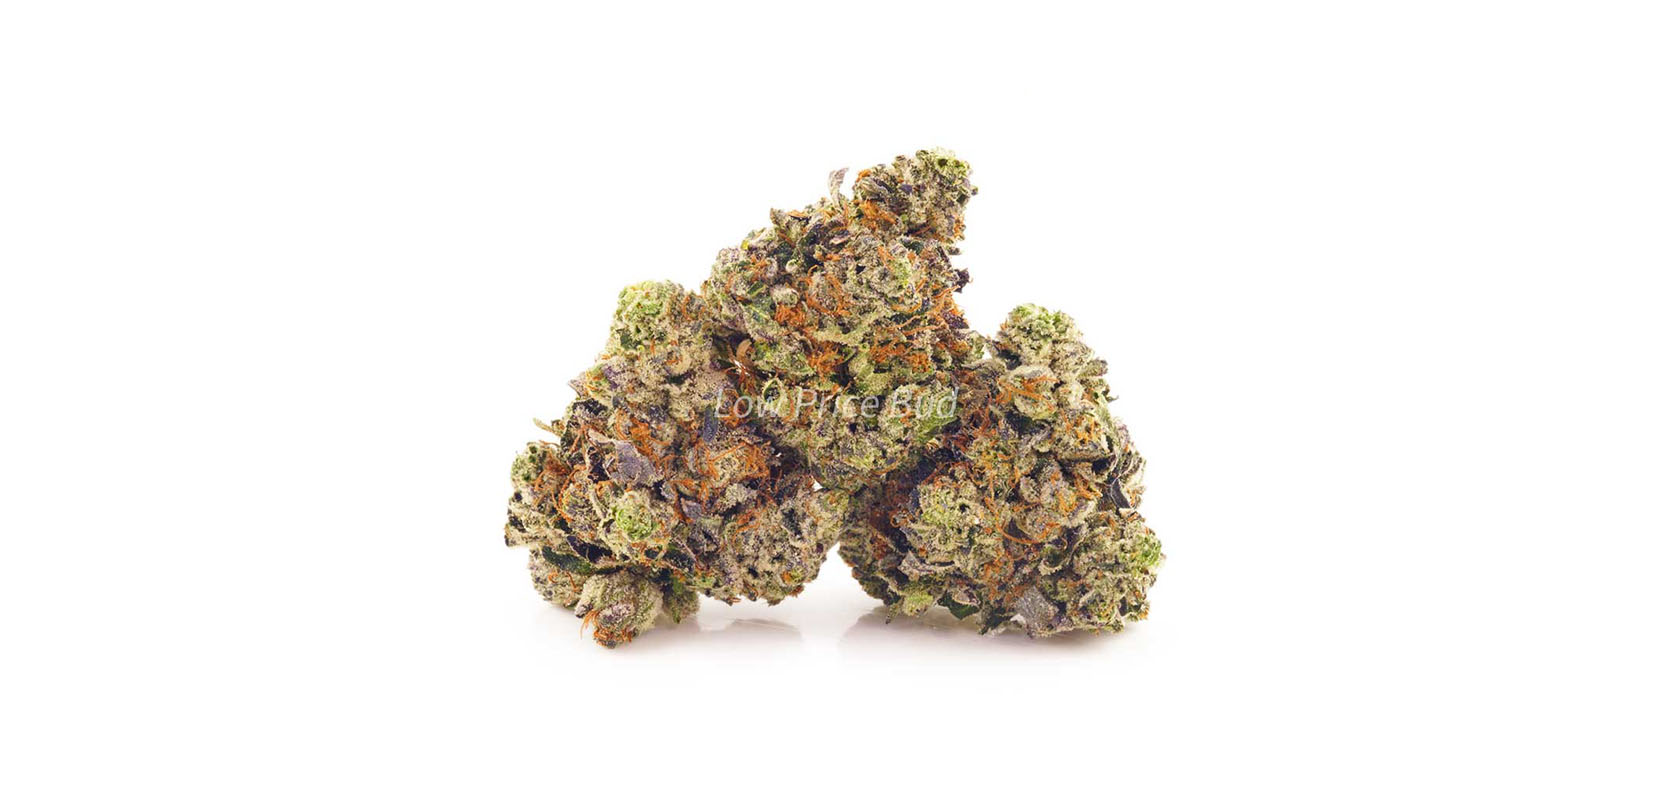 Gas Mask OG value buds at Low Price Bud online dispensary Canada to buy online weeds. bc online dispensary. cheapest weed online canada. order weed canada.